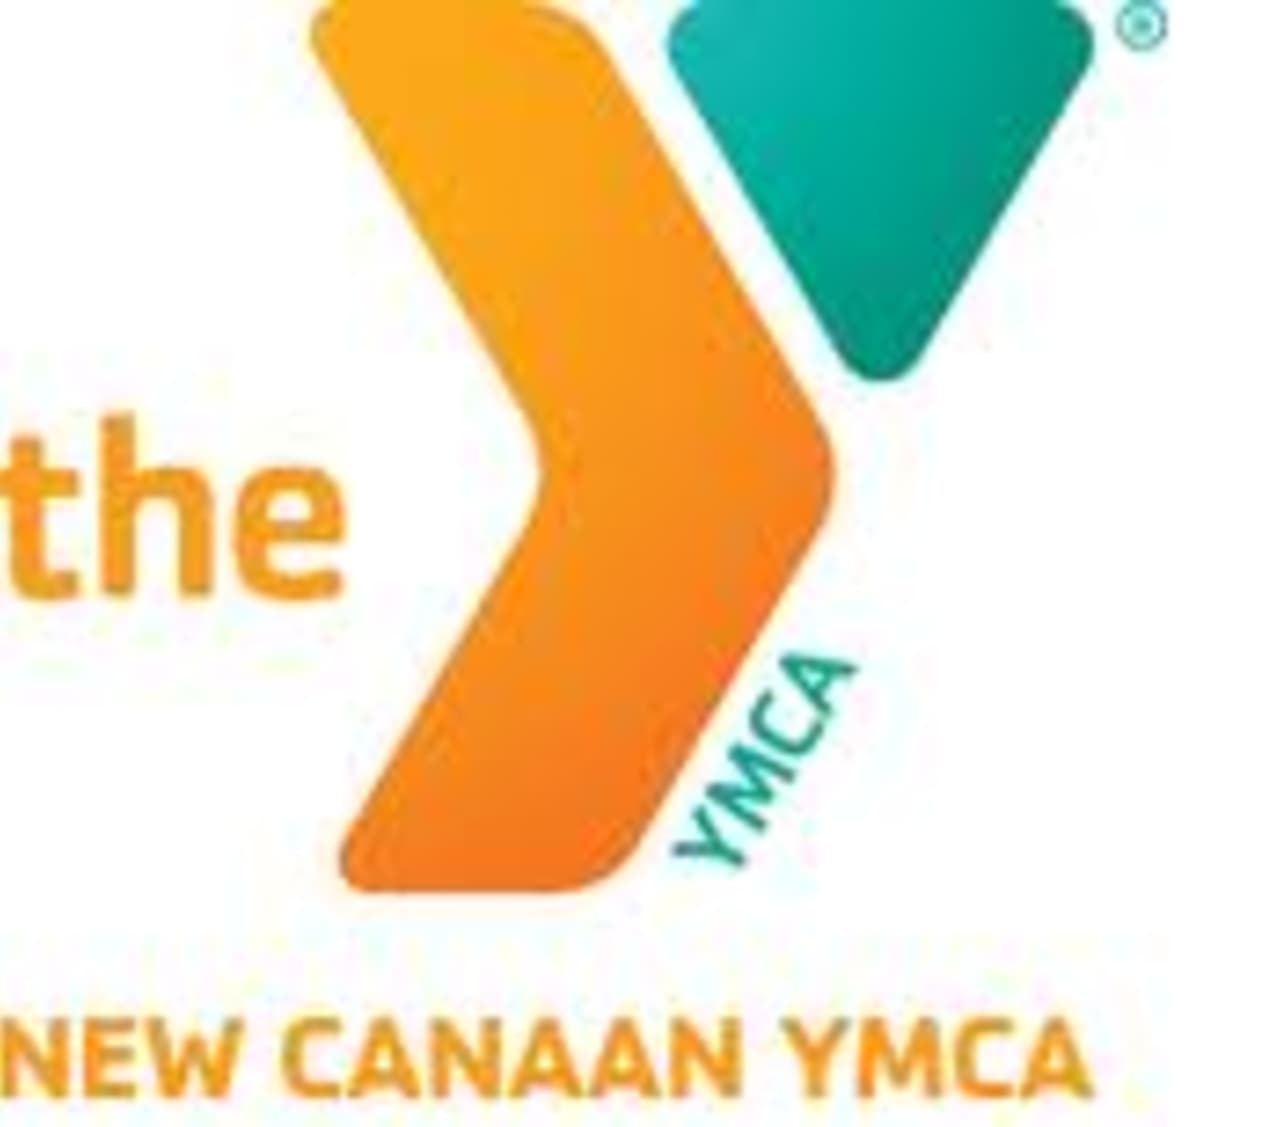 The New Canaan YMCA released its schedule for fall classes and programs.